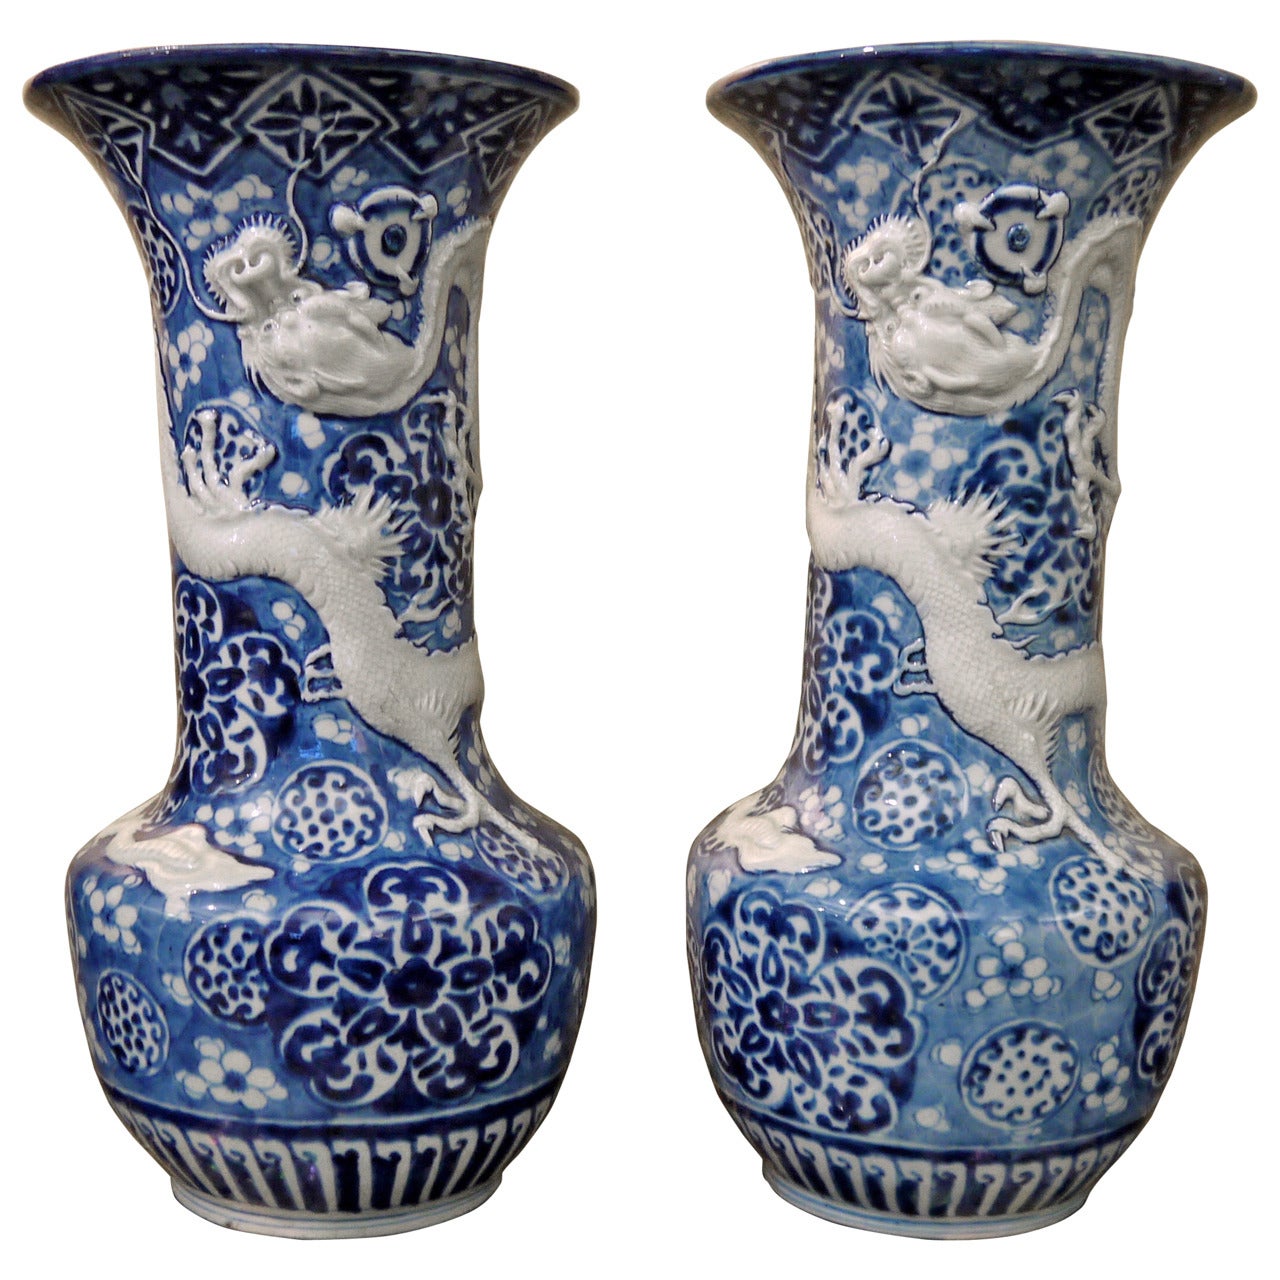 Pair of Japanese Vases with Dragons